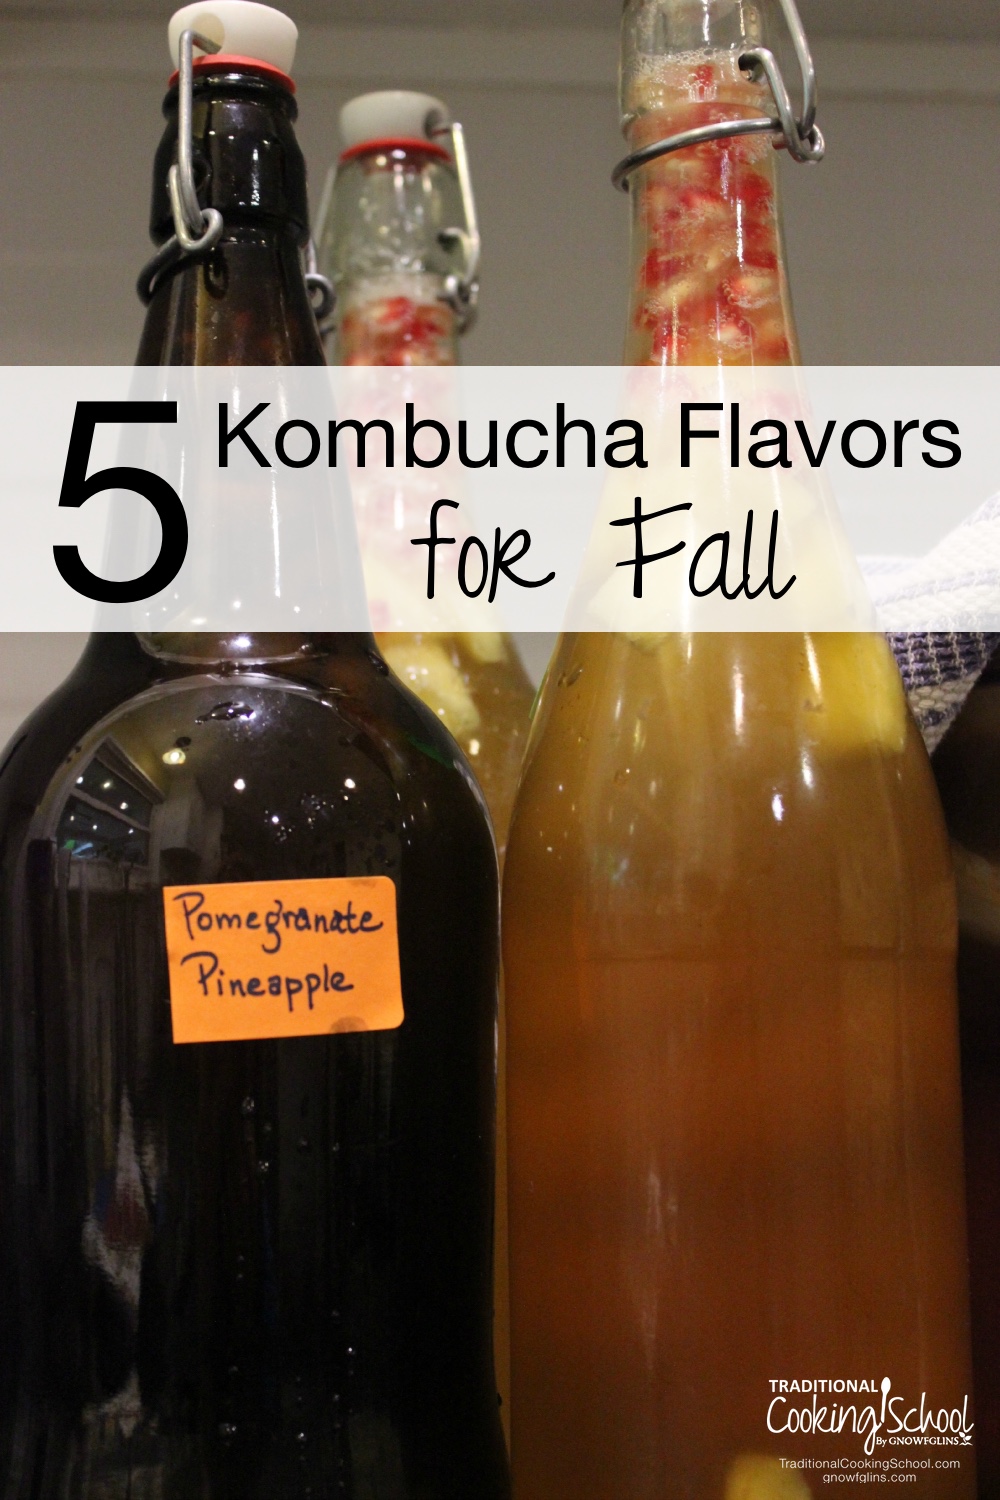 5 Kombucha Flavors for Fall | Kombucha can be expensive to purchase, but it costs just pennies to make at home! Once you get the hang of it, it's time to experiment with flavorings. Here are 5 fun spiced and fruit flavorings for Fall. | TraditionalCookingSchool.com